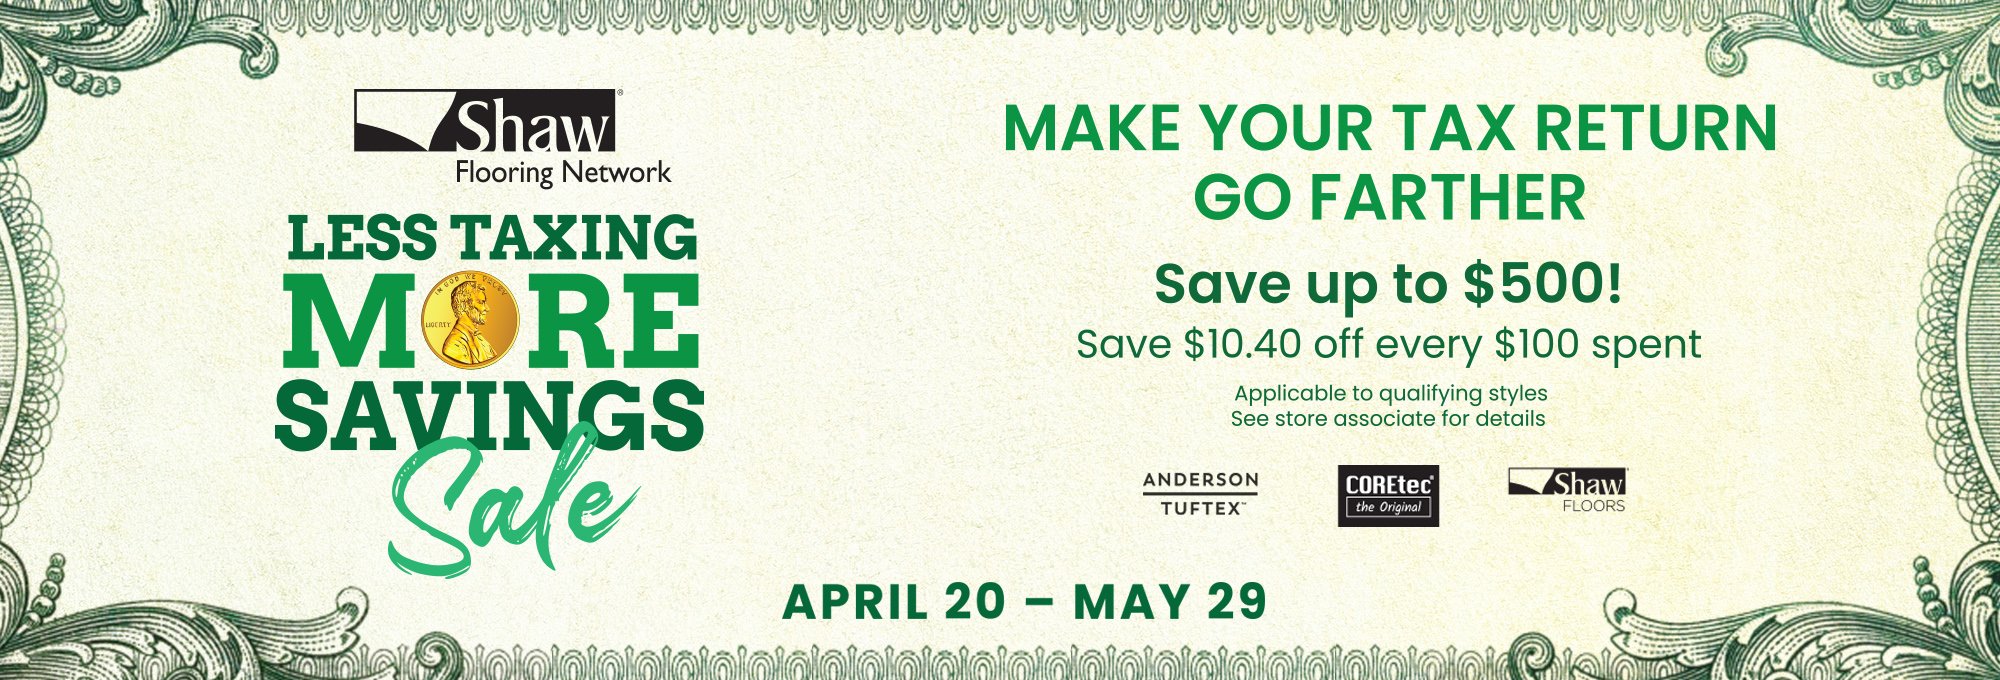 Less Taxing More Savings Sale - Save up to $500